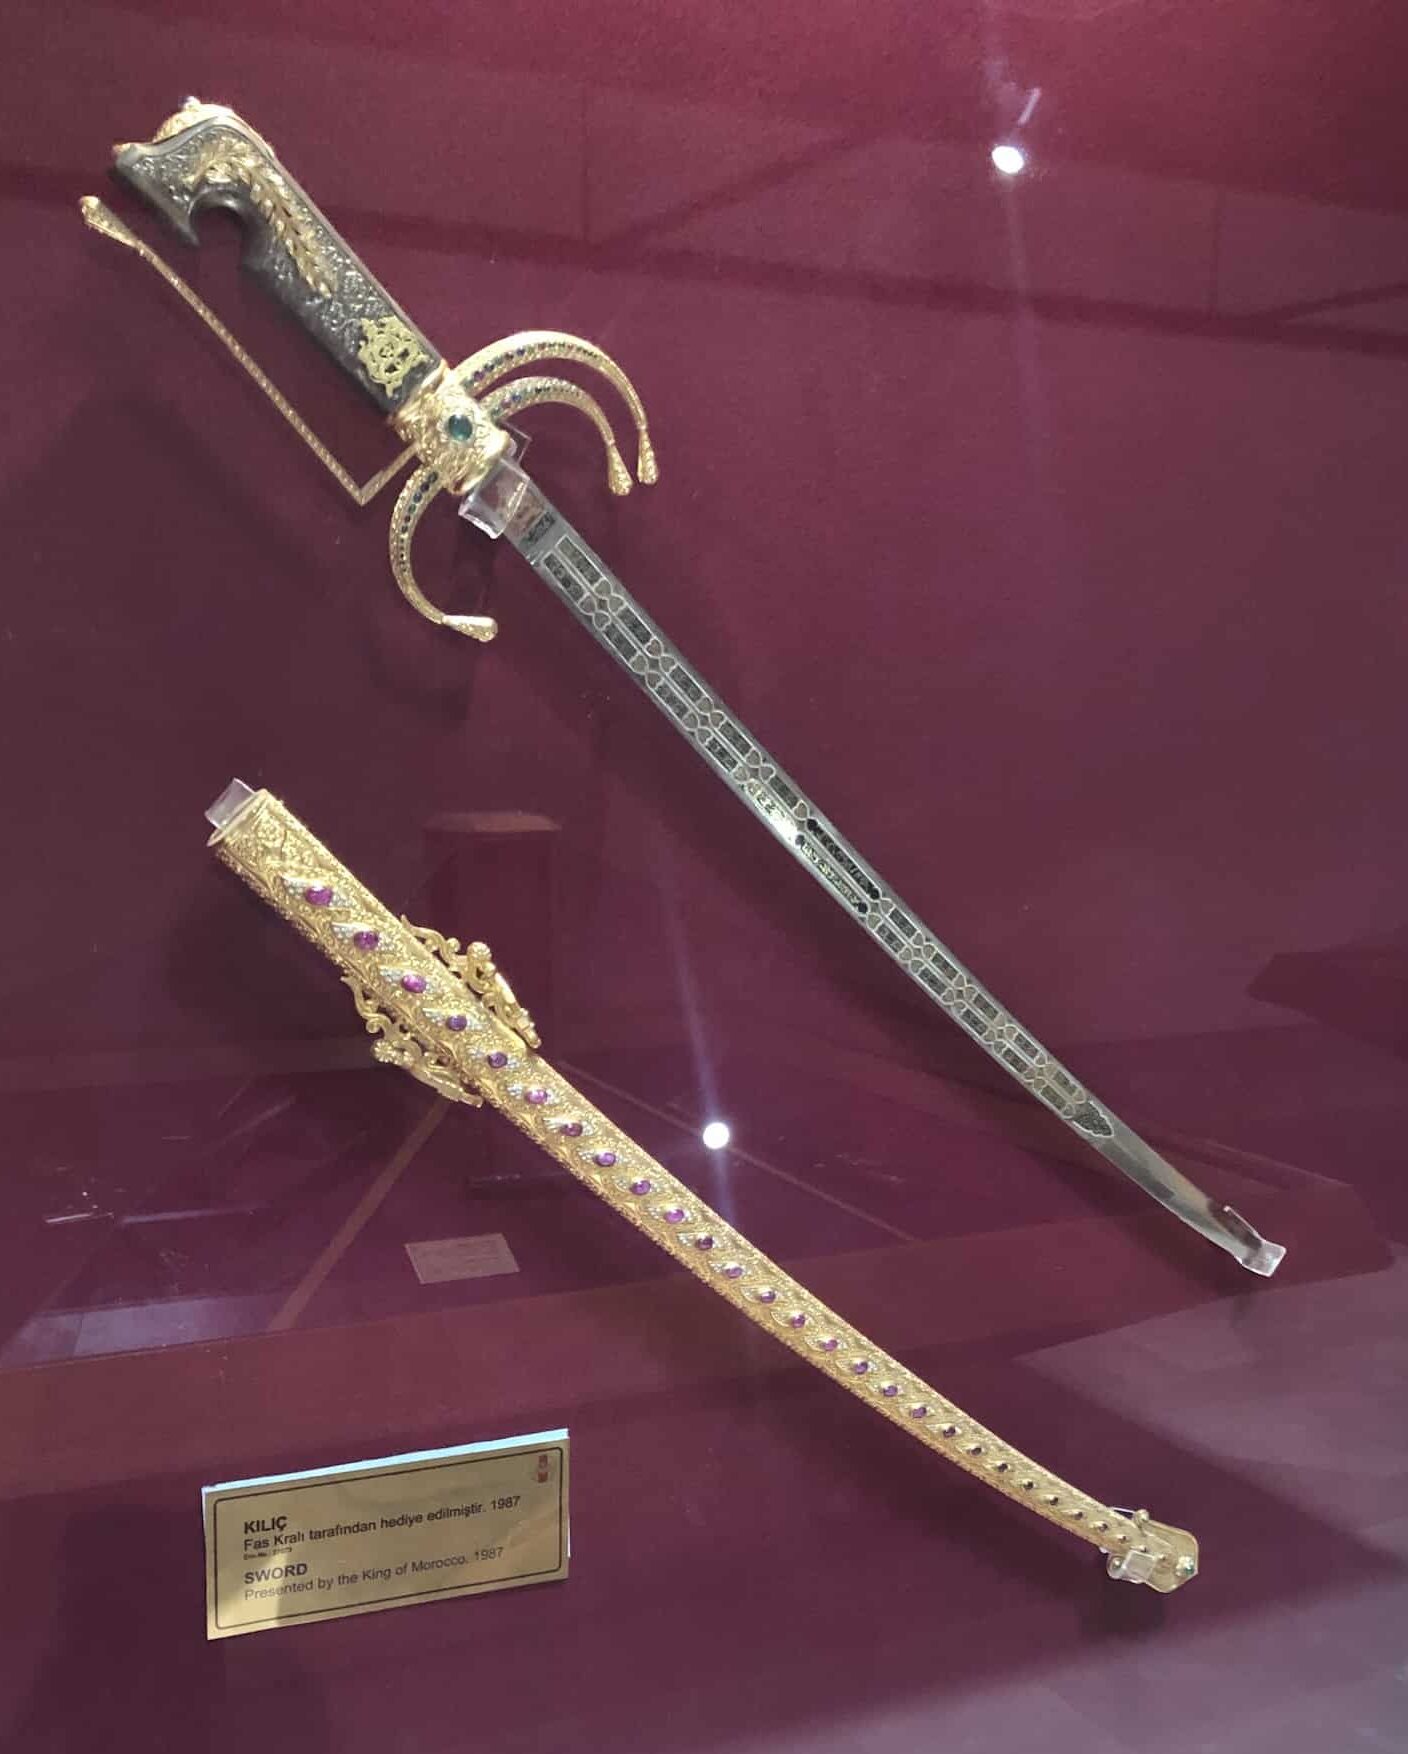 Sword presented by the King of Morocco